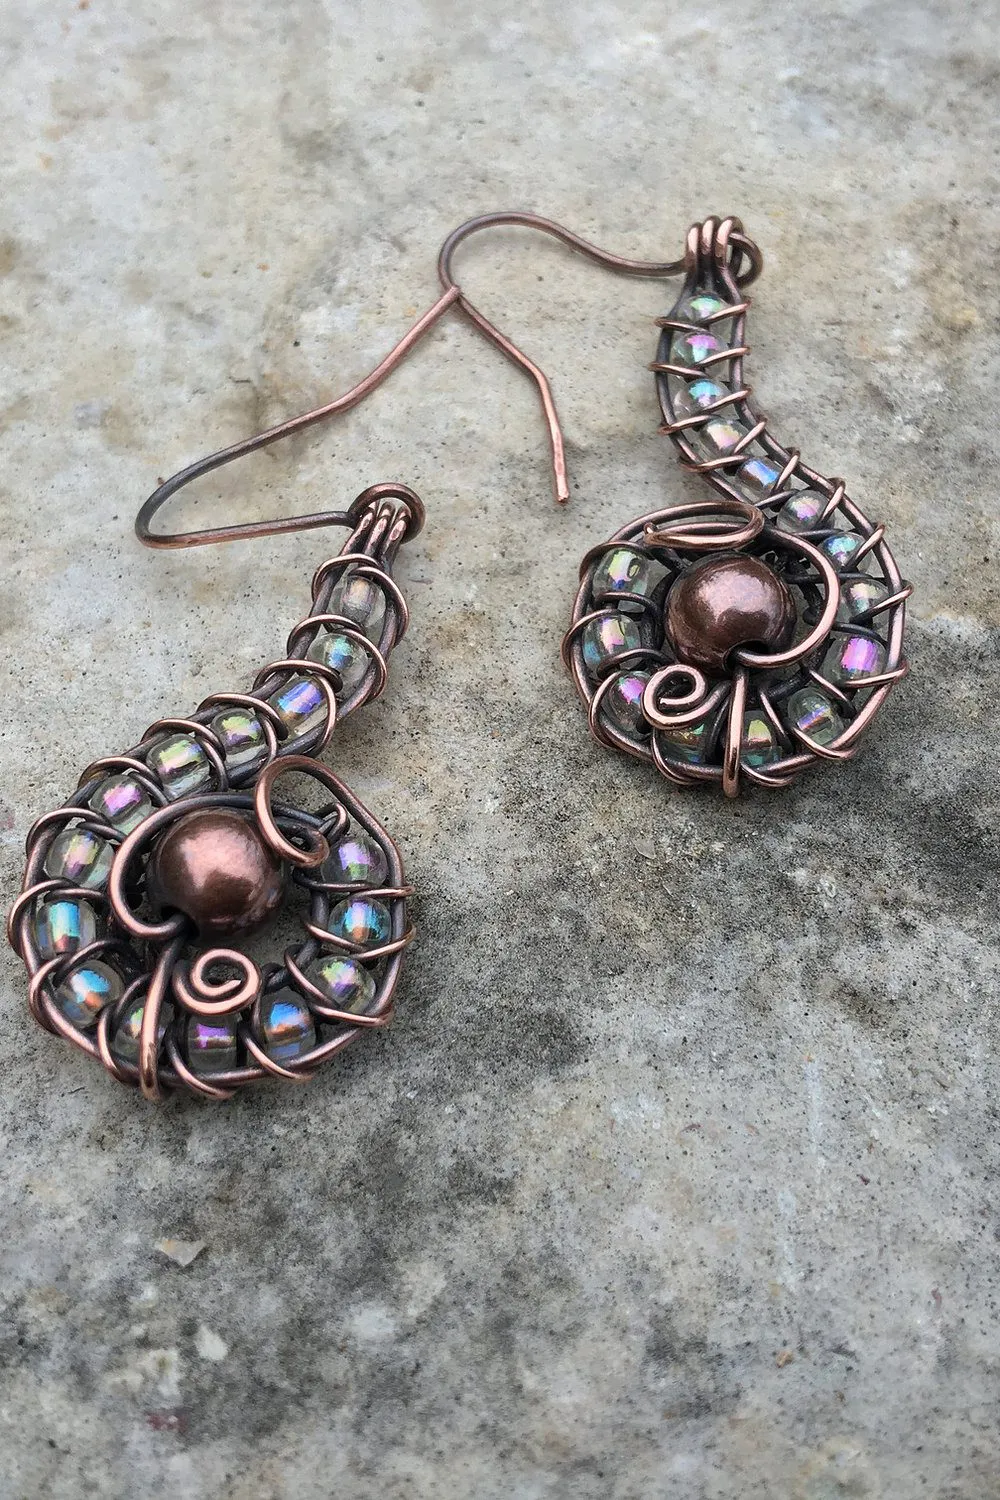 copper earrings with iridescent glass beads - glass gemstones